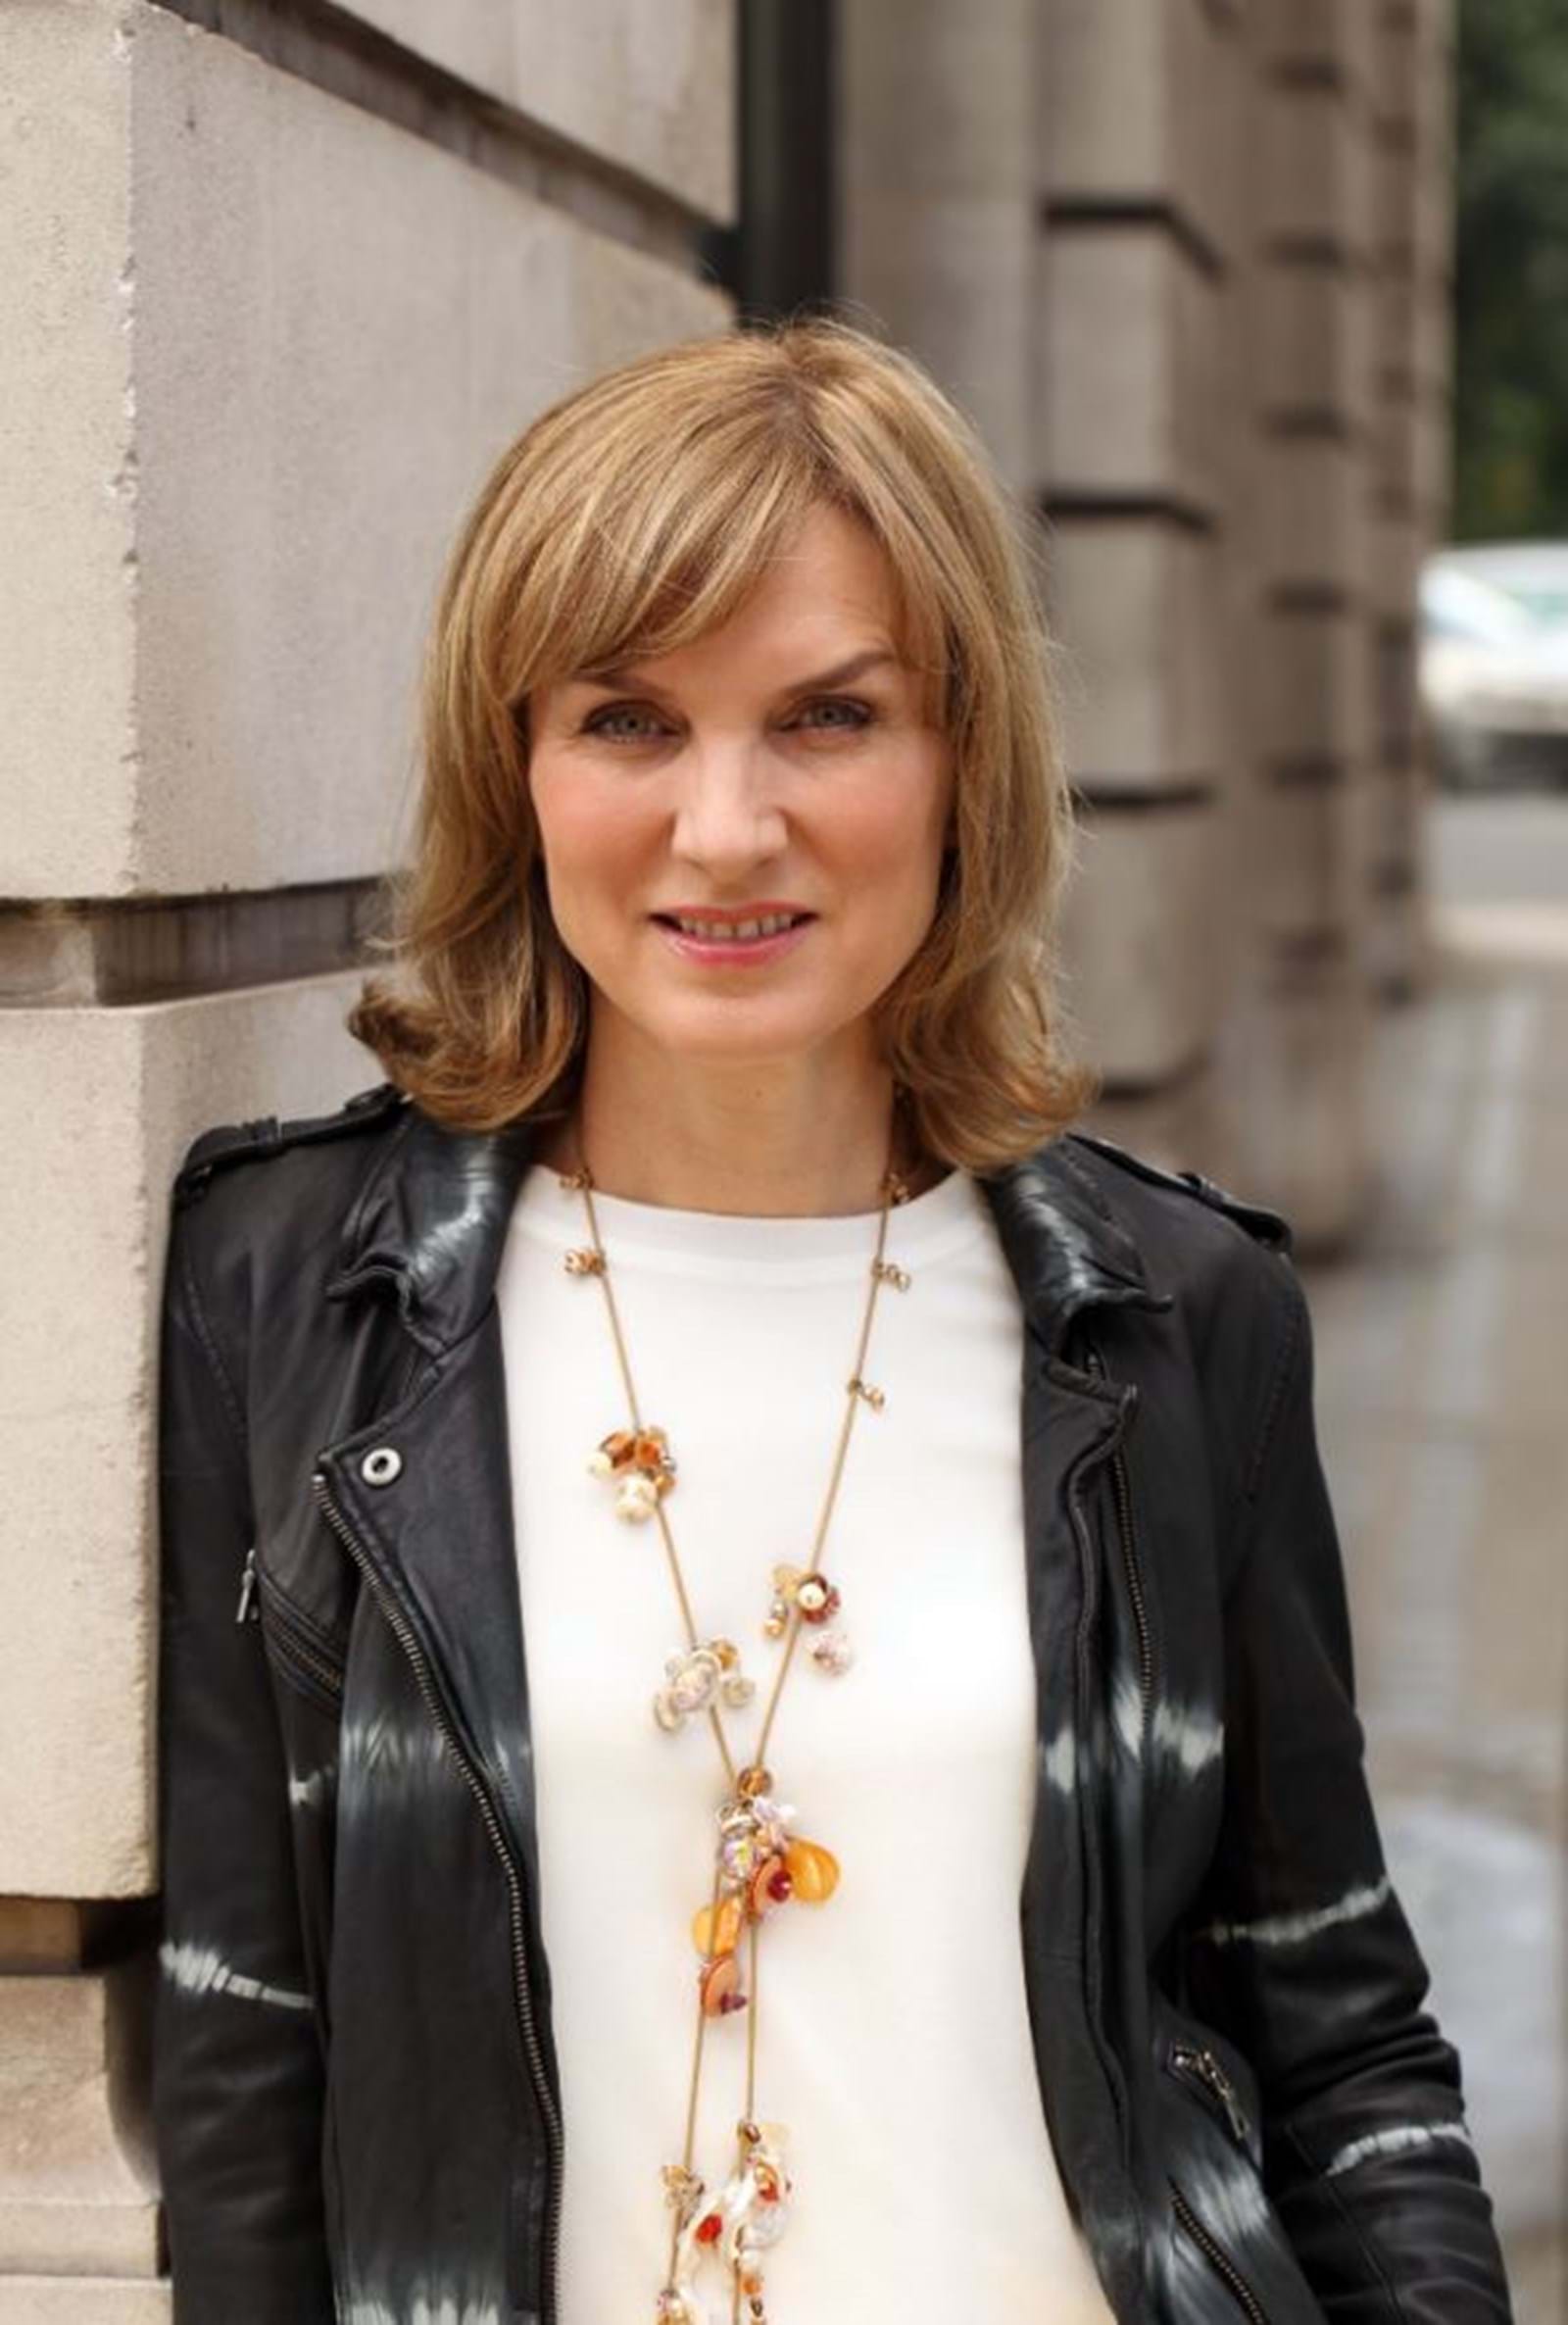 FIONA BRUCE ANNOUNCED AS NEW PRESENTER FOR MENTORN'S QUESTION TIME